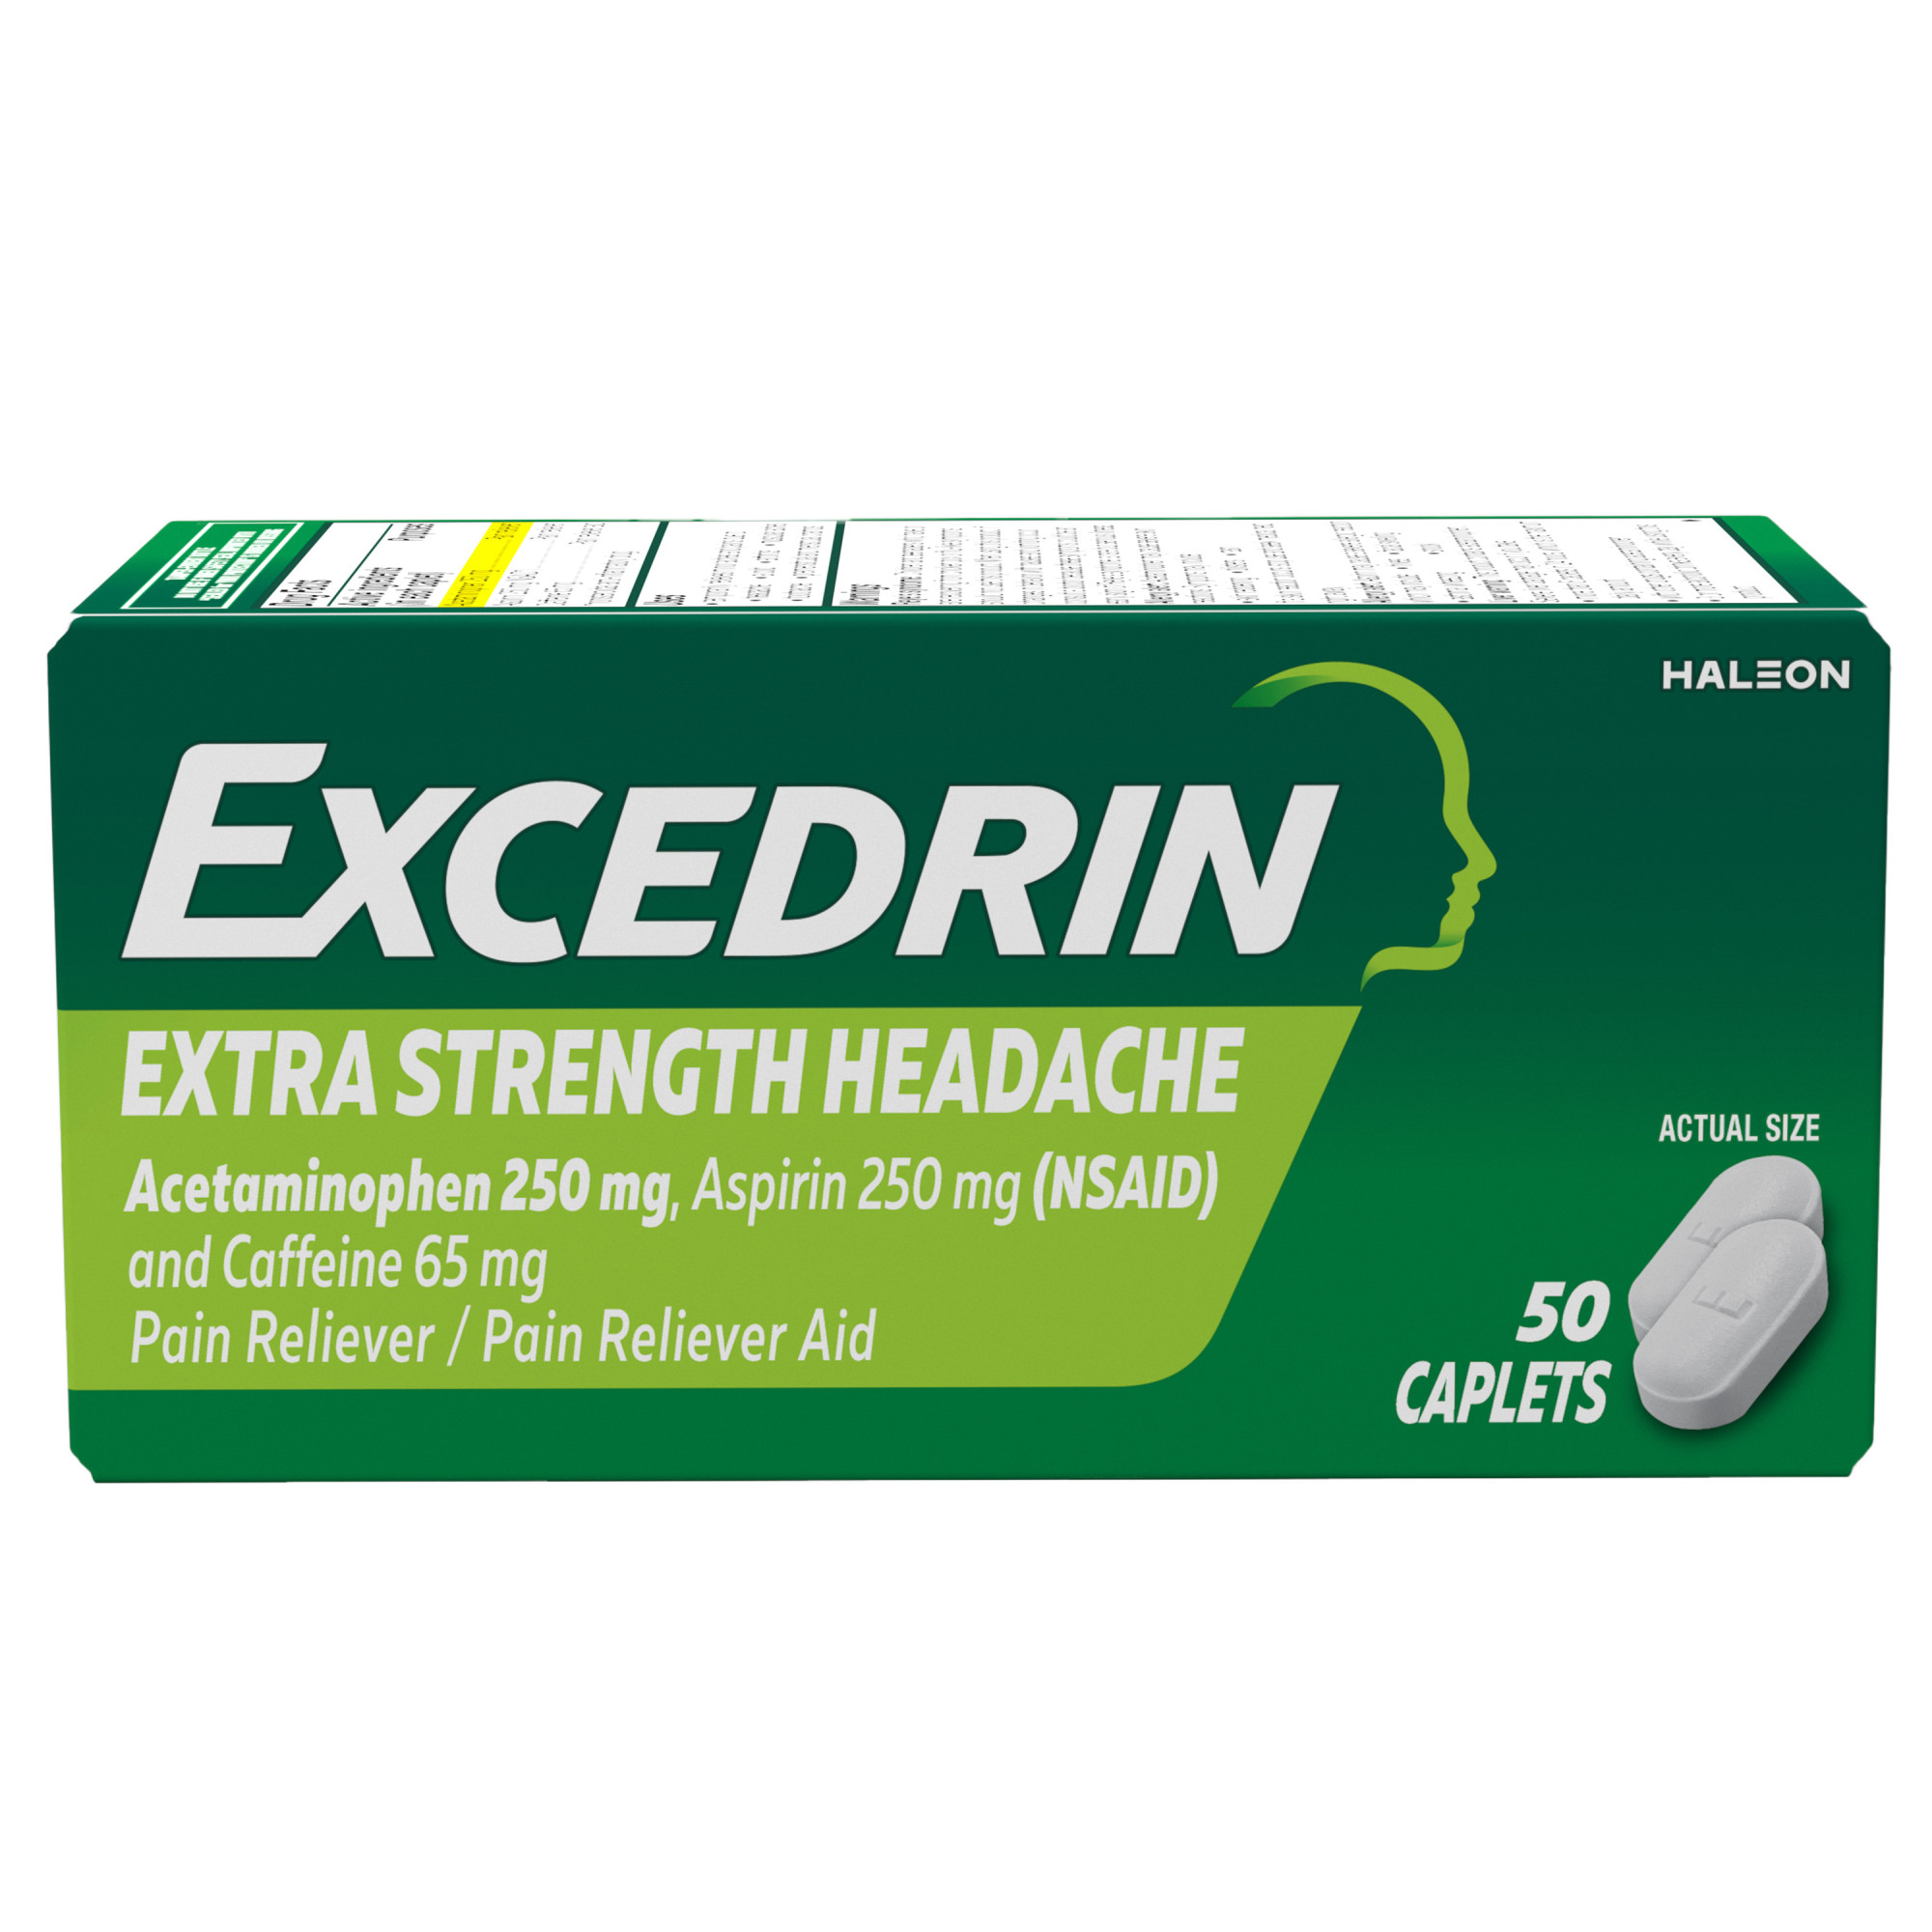 Excedrin Extra Strength Acetminophen and Aspirin Headache Medicine Caplets, 50 Count - image 1 of 7